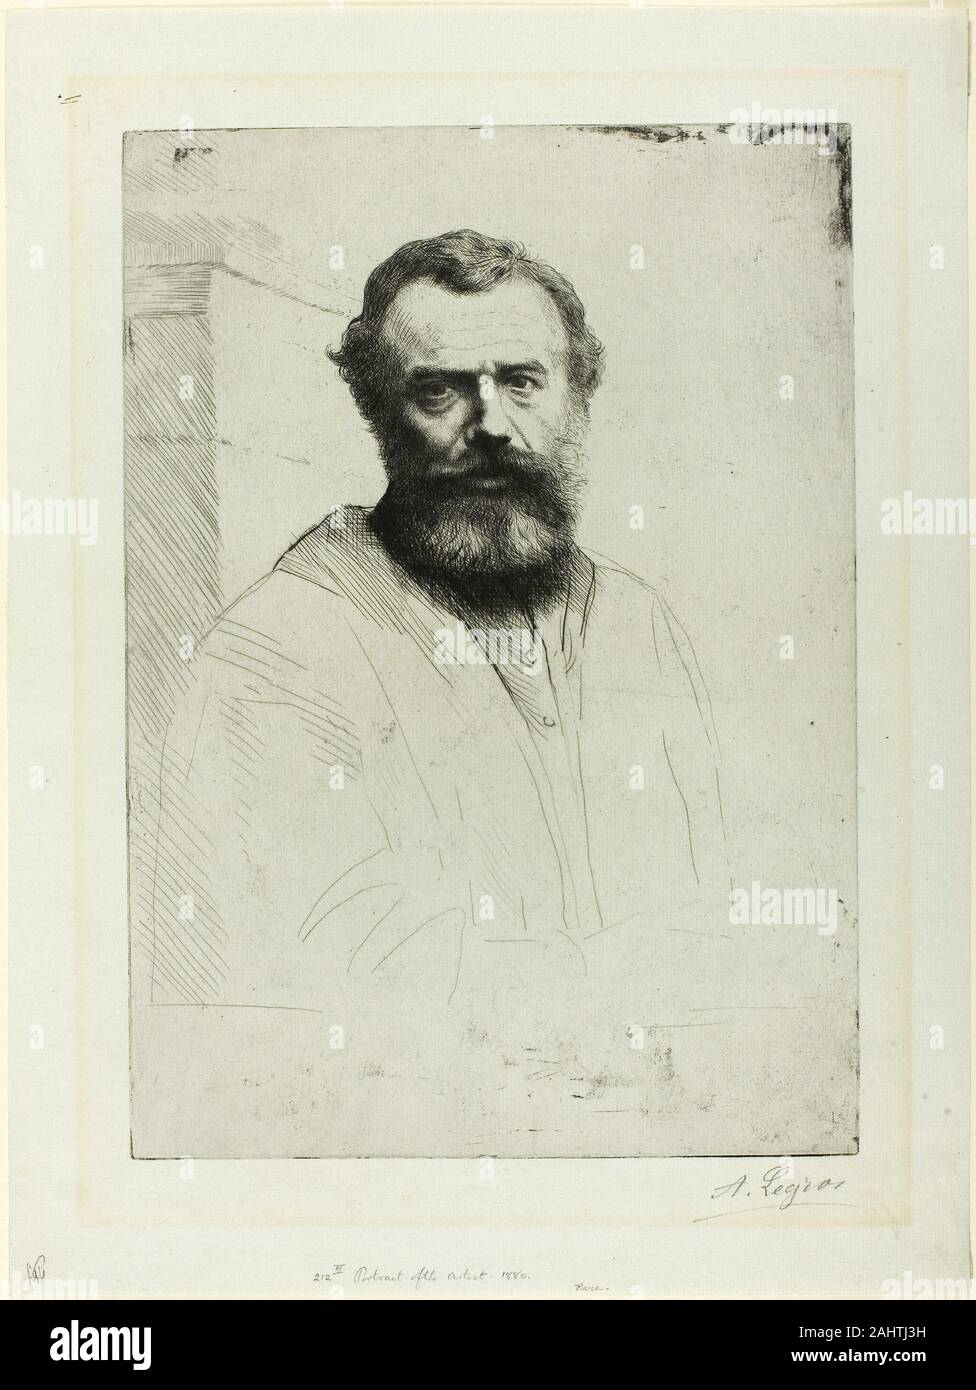 Alphonse Legros. Portrait of the Artist. 1880. France. Etching and drypoint on light blue laid paper Stock Photo